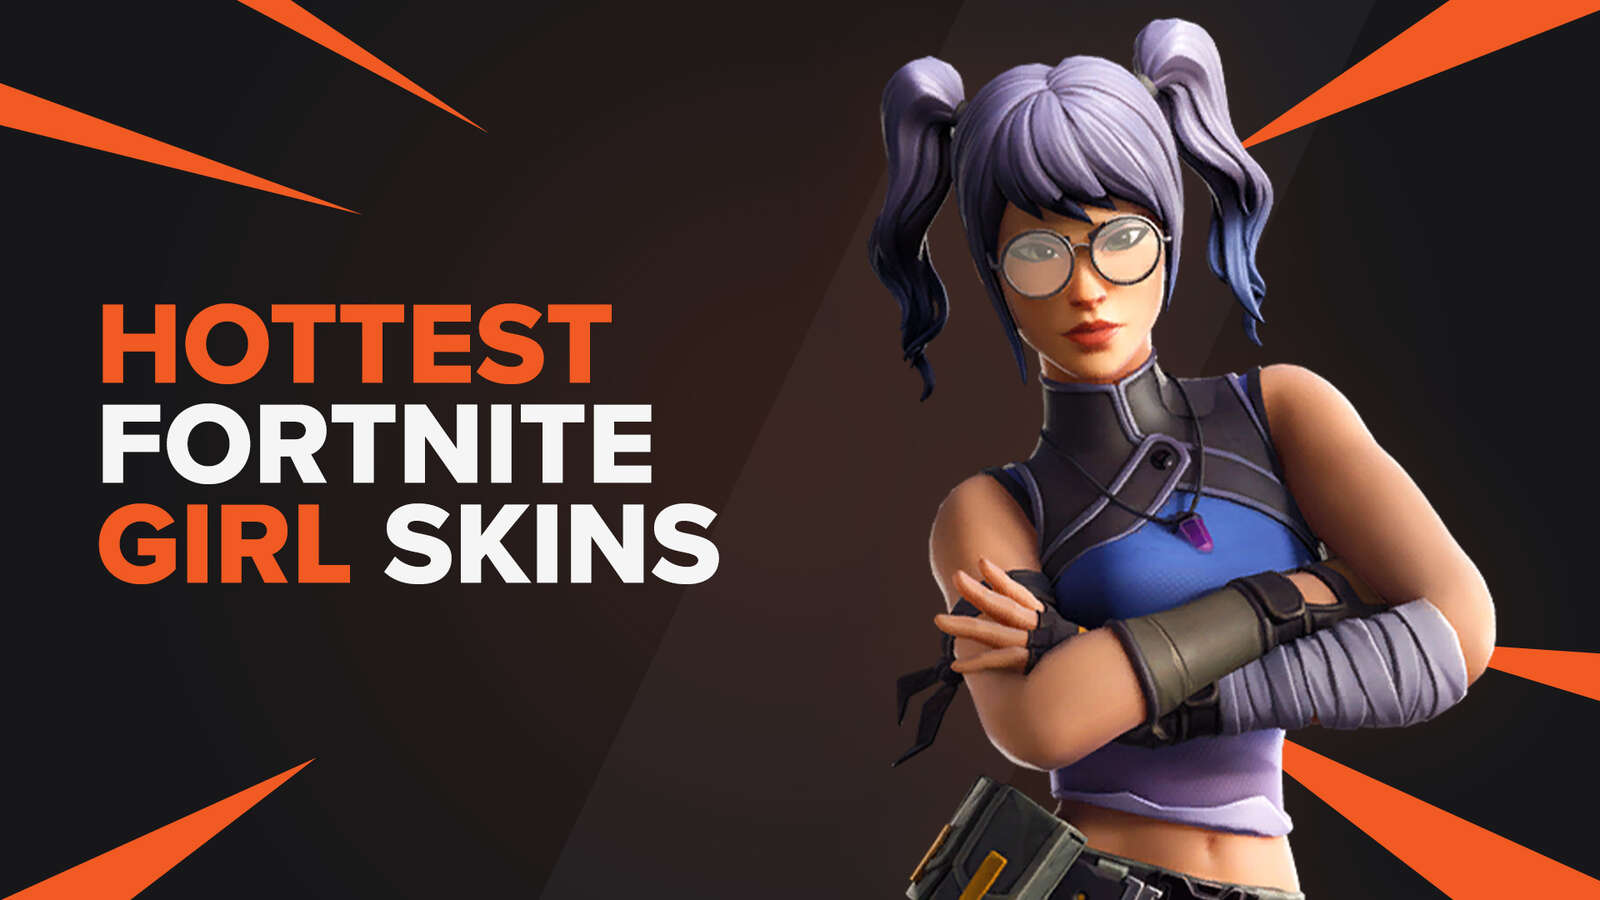 These 7 Female Fortnite Skins Are Hot!